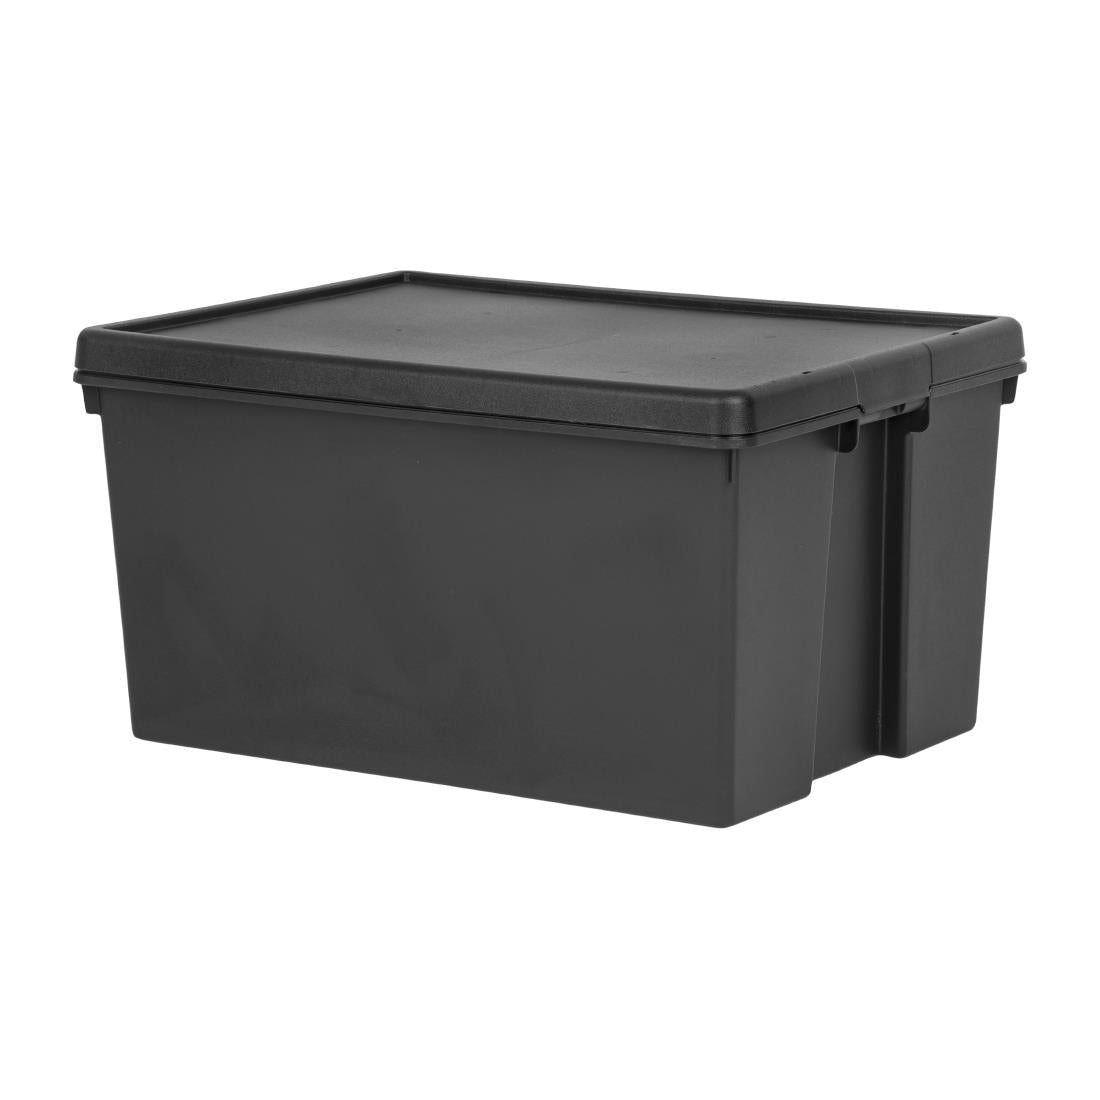 CX096 Wham Bam Recycled Storage Box & Lid Black 96Ltr JD Catering Equipment Solutions Ltd